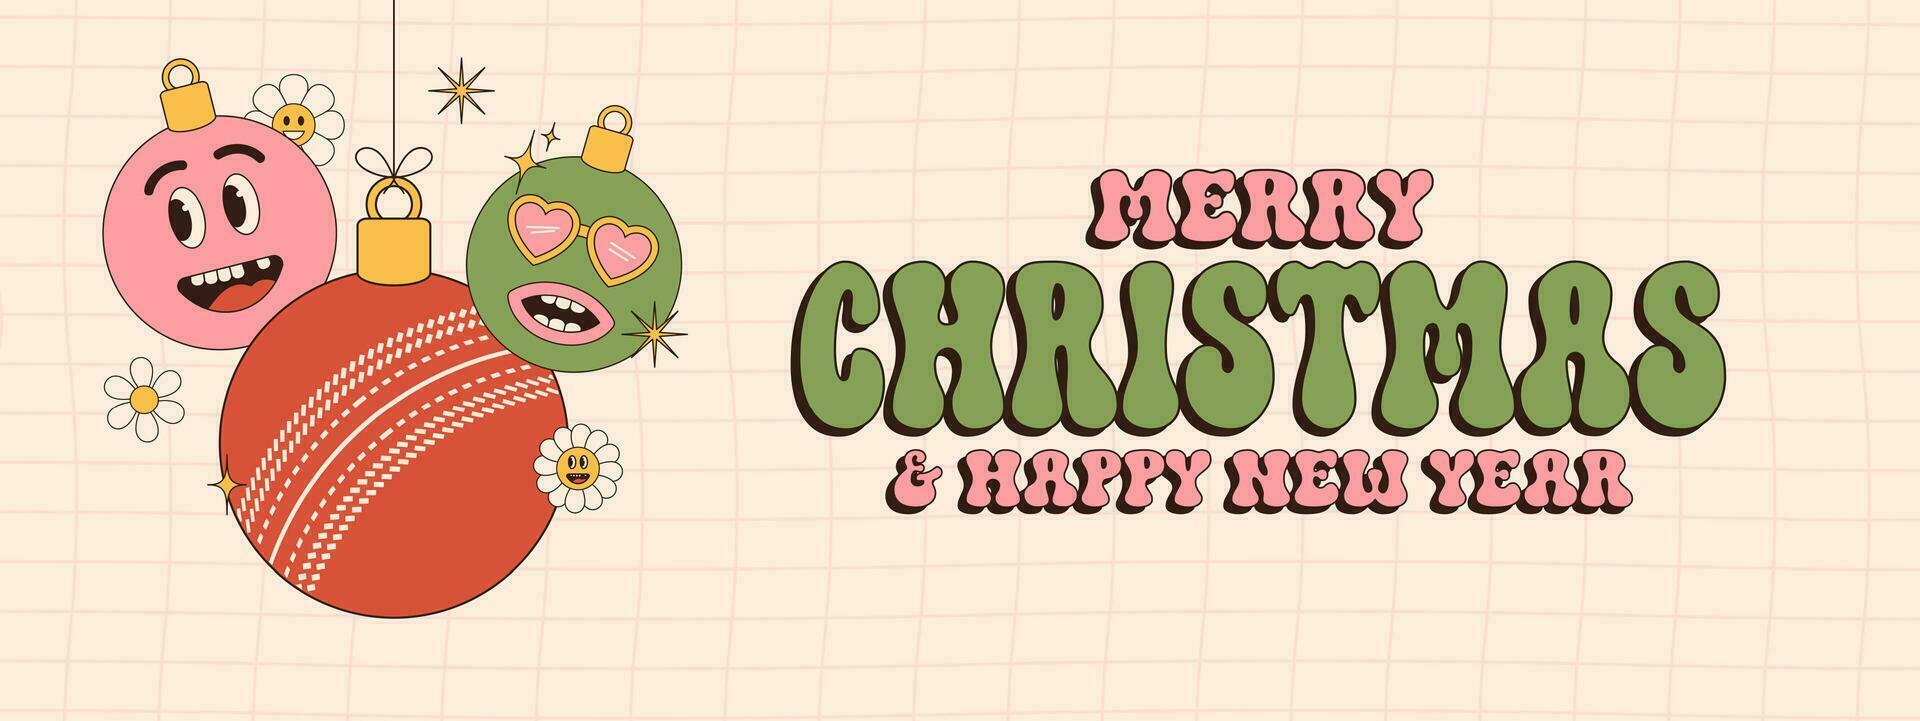 cricket Merry Christmas and Happy New Year groovy Sports greeting card. Hanging ball as a groovy Christmas ball on vibrant background. Vector illustration.